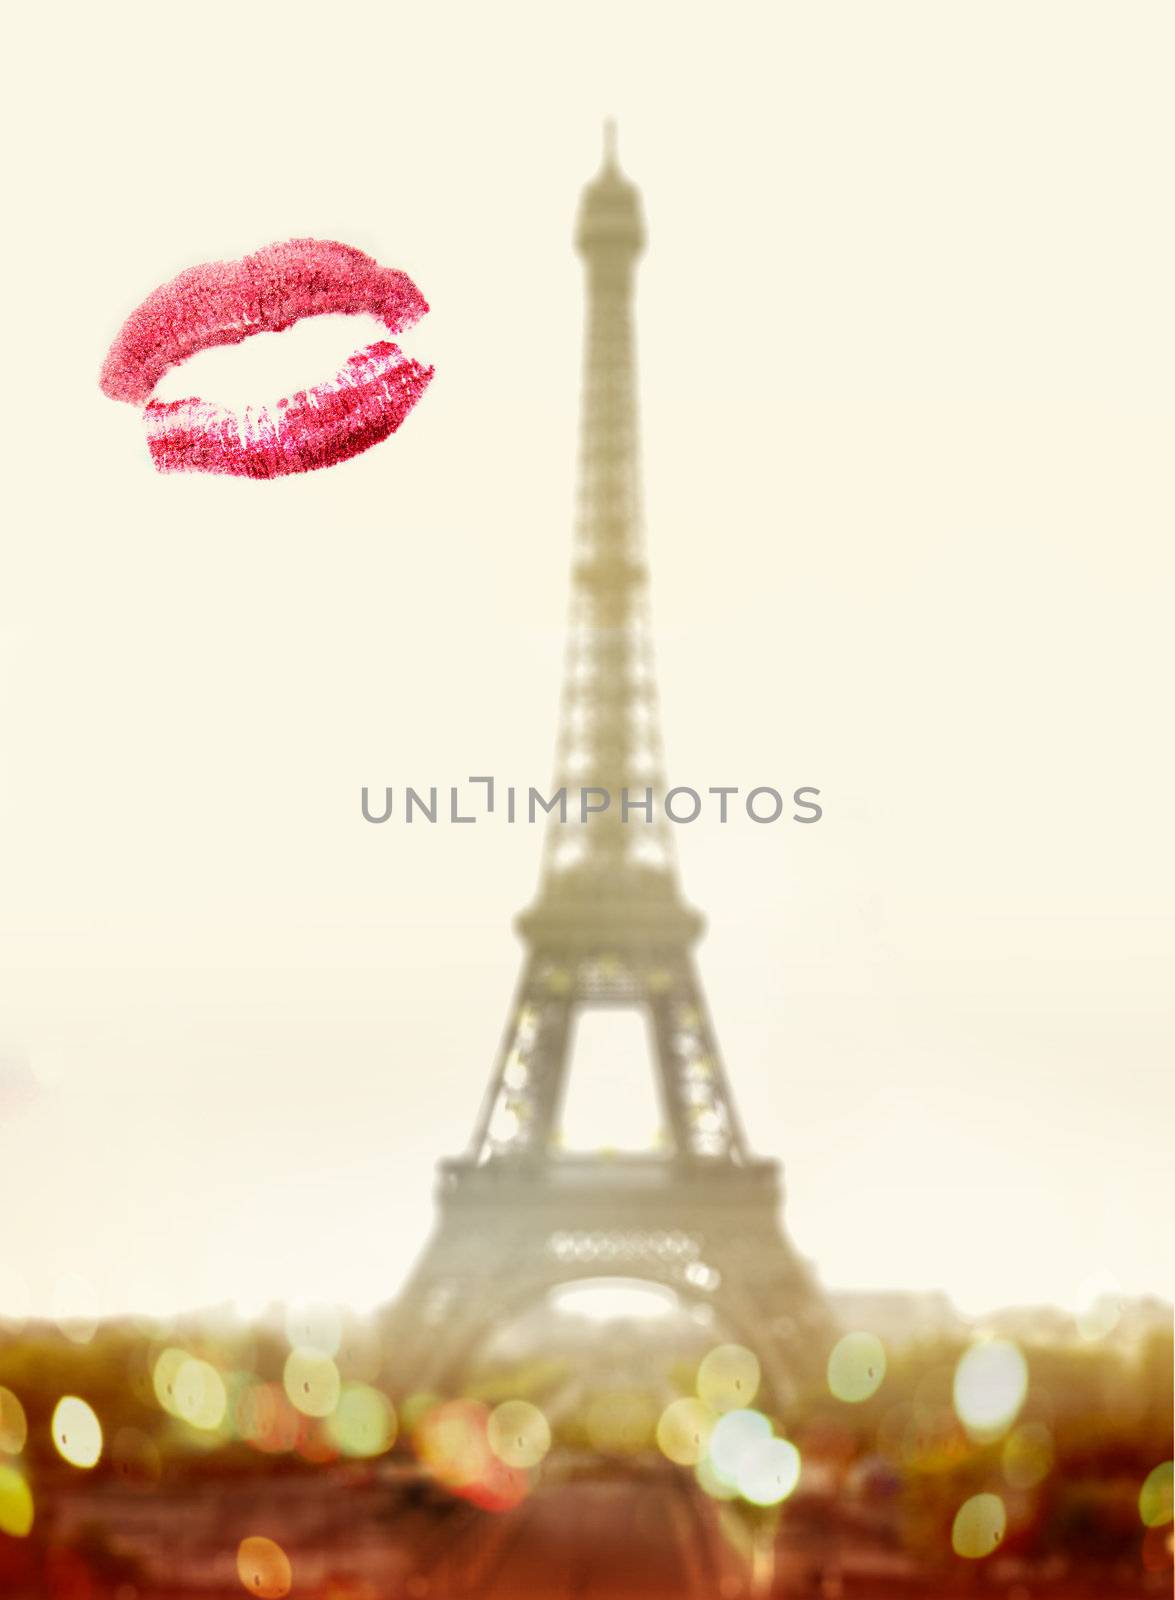 Lipstick kiss on window in front of famous Eiffel Tower in Paris